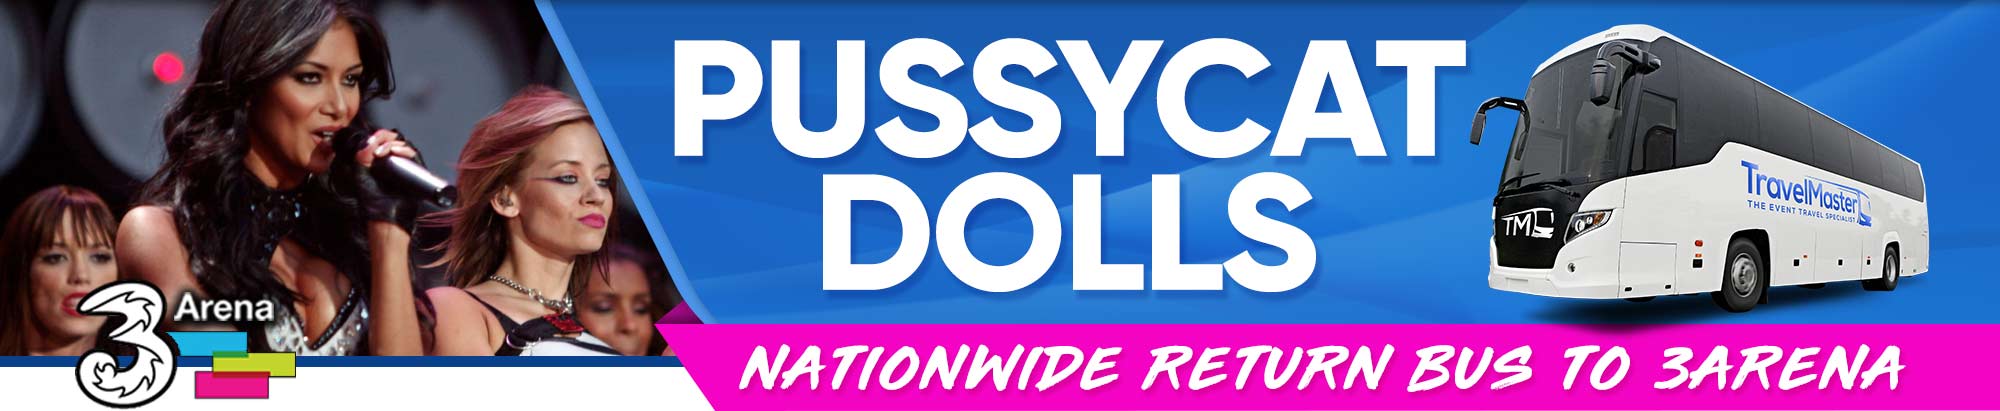 Bus to Pussycat Dolls 3Arena | Nationwide Return | 5th April 2020